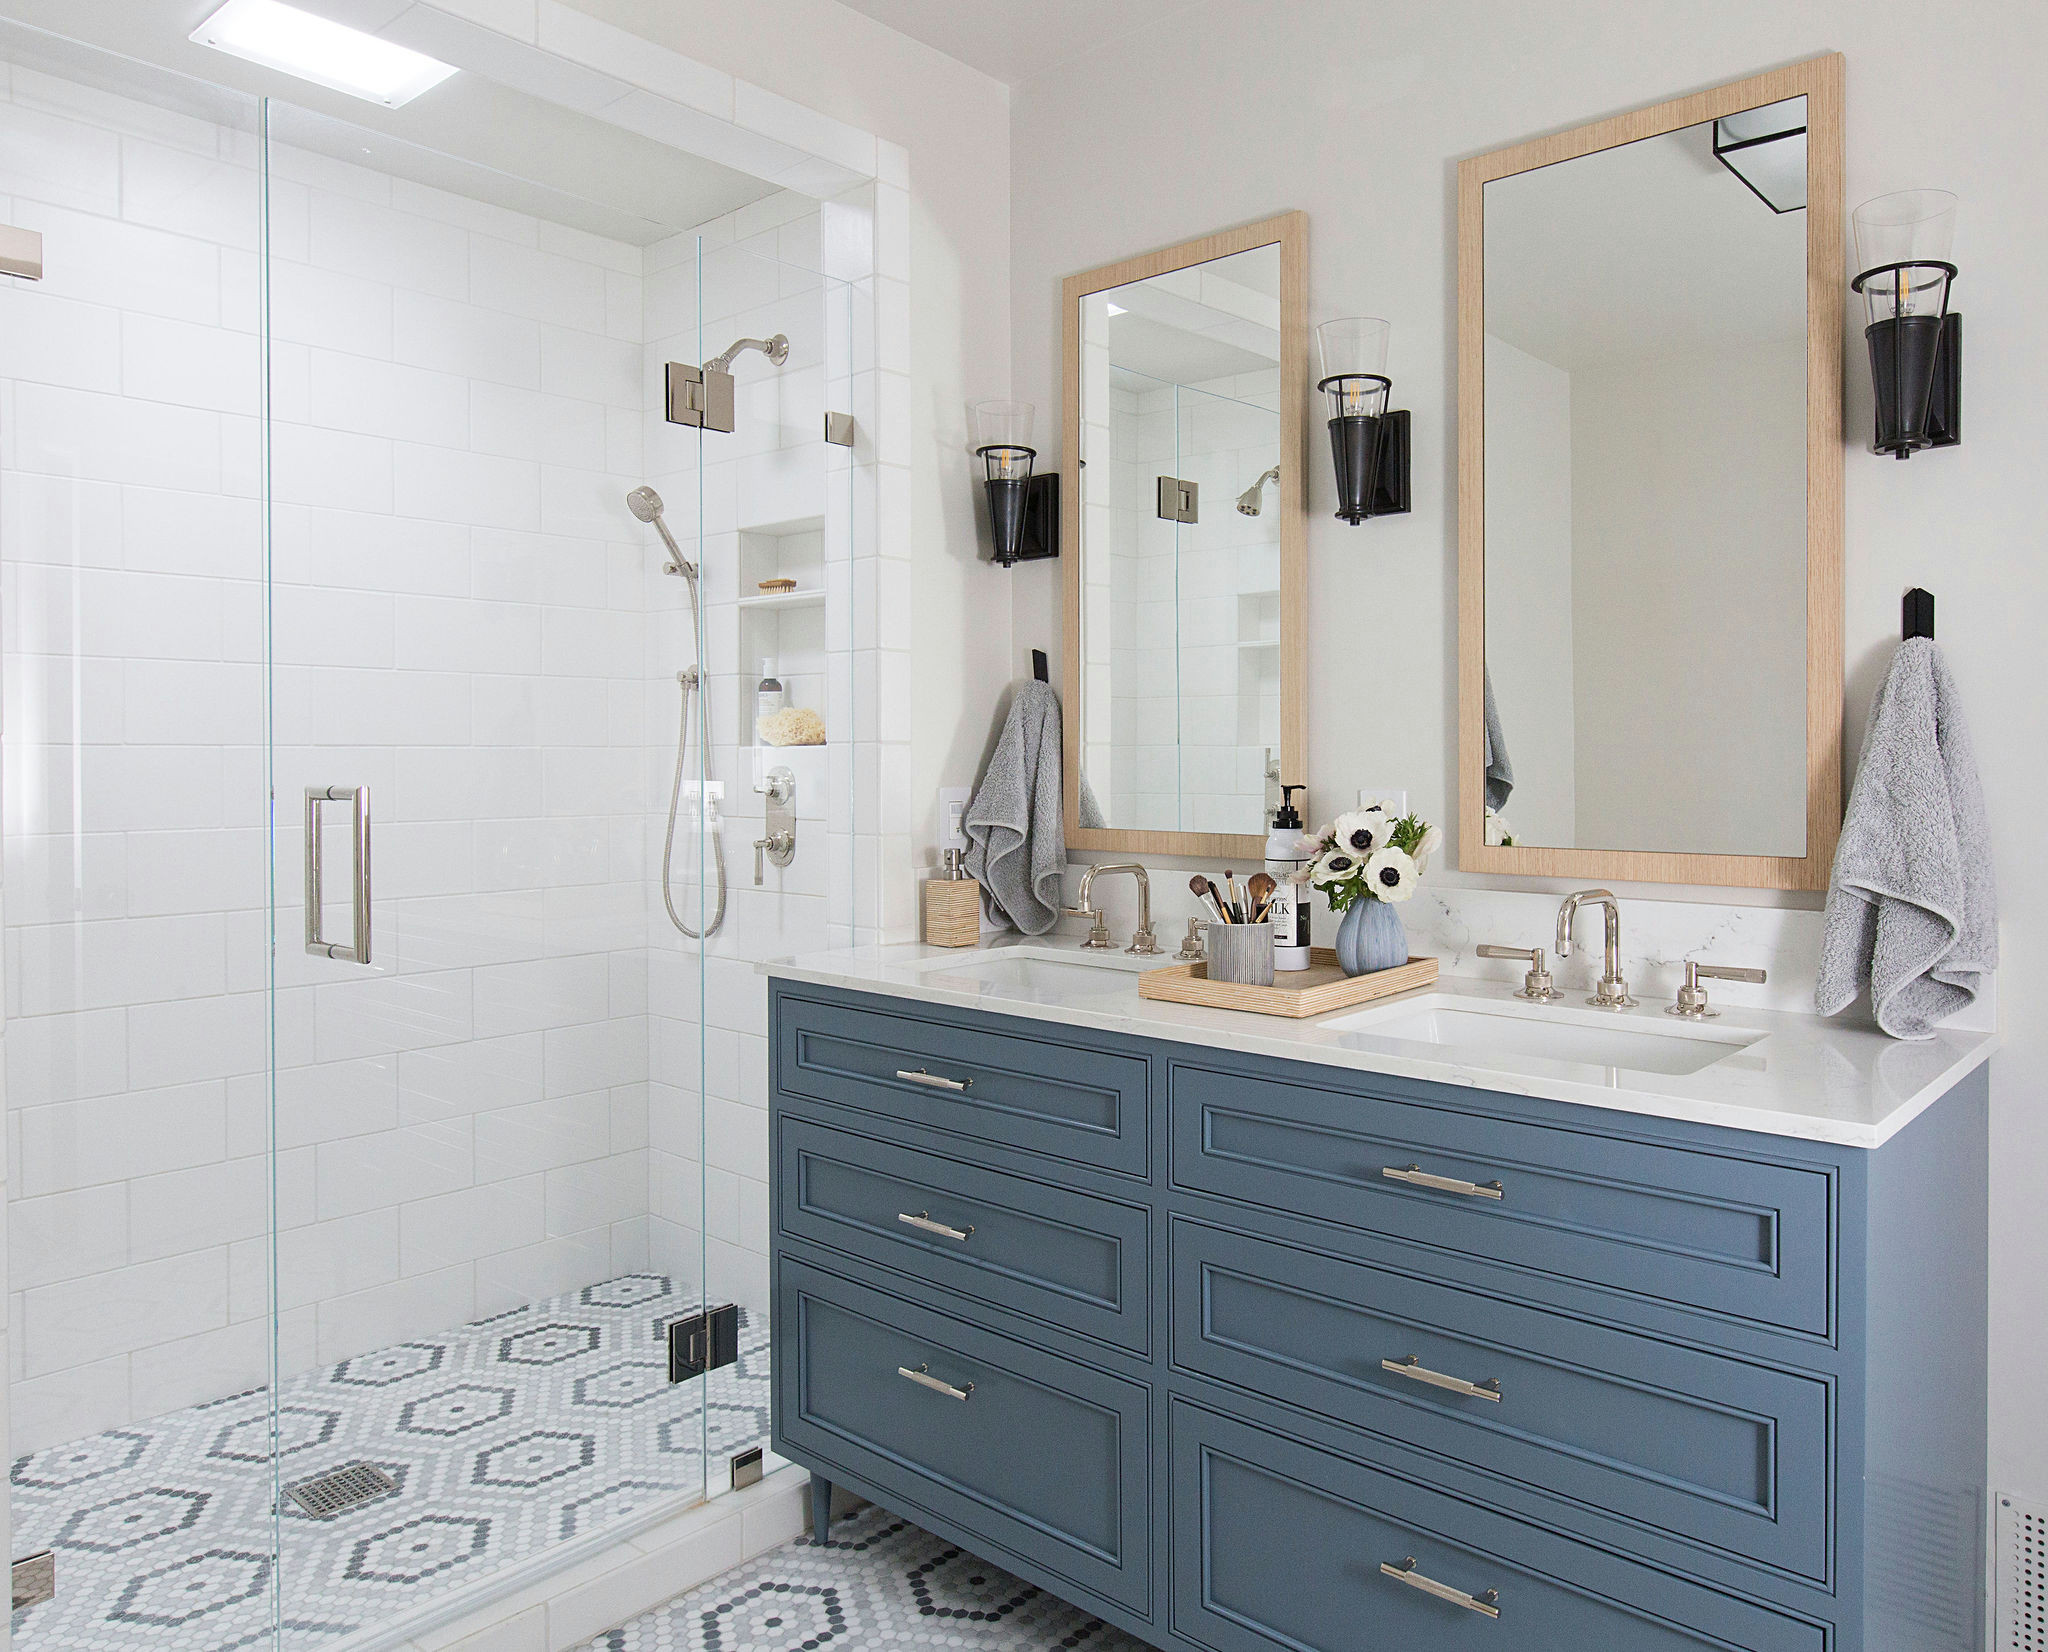 75 Beautiful Large Bathroom Pictures Ideas July 2020 Houzz